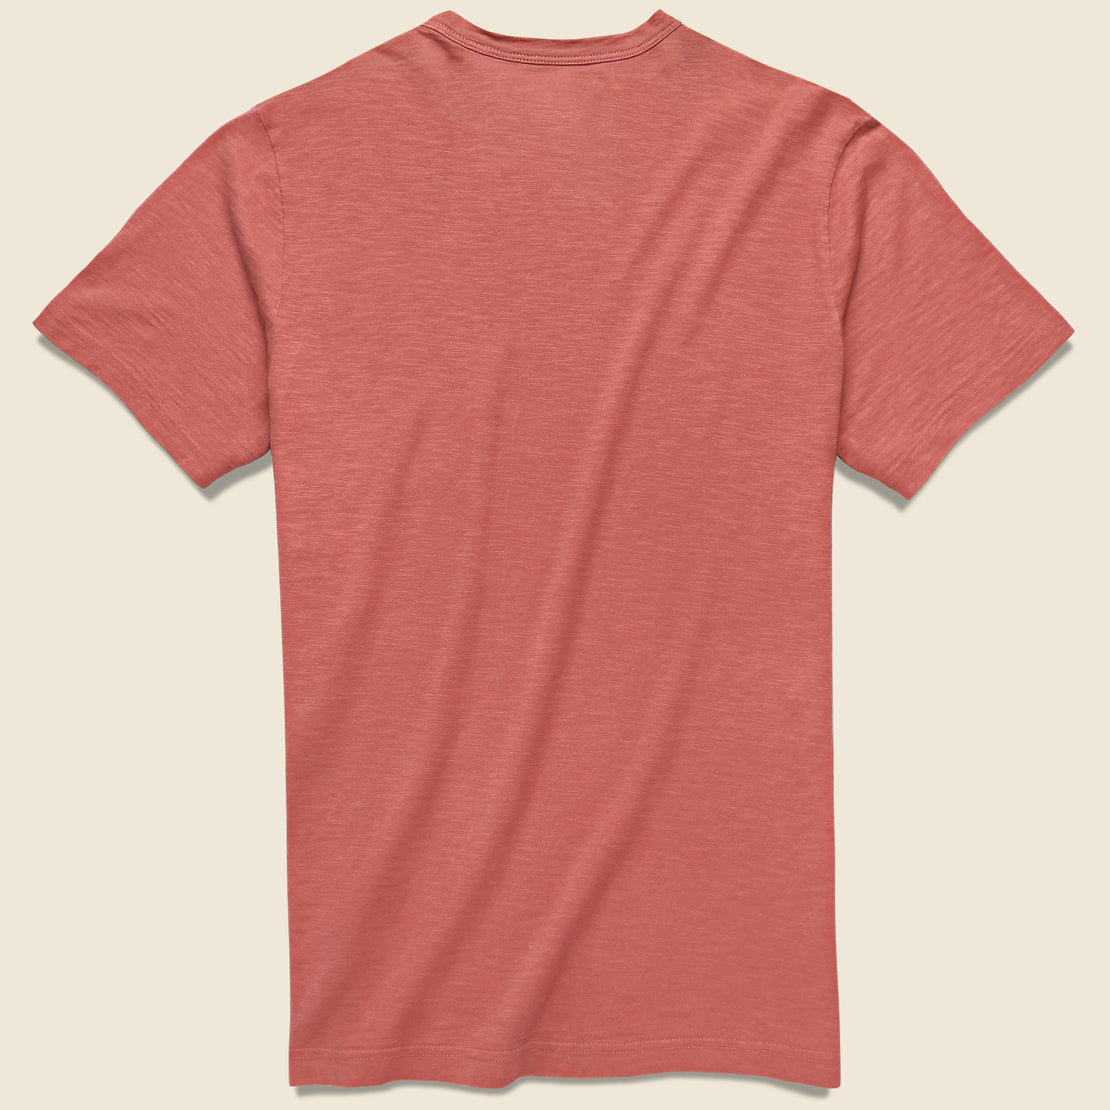 Garment Dyed Pocket Tee - Hermosa Red - Faherty - STAG Provisions - Tops - S/S Tee